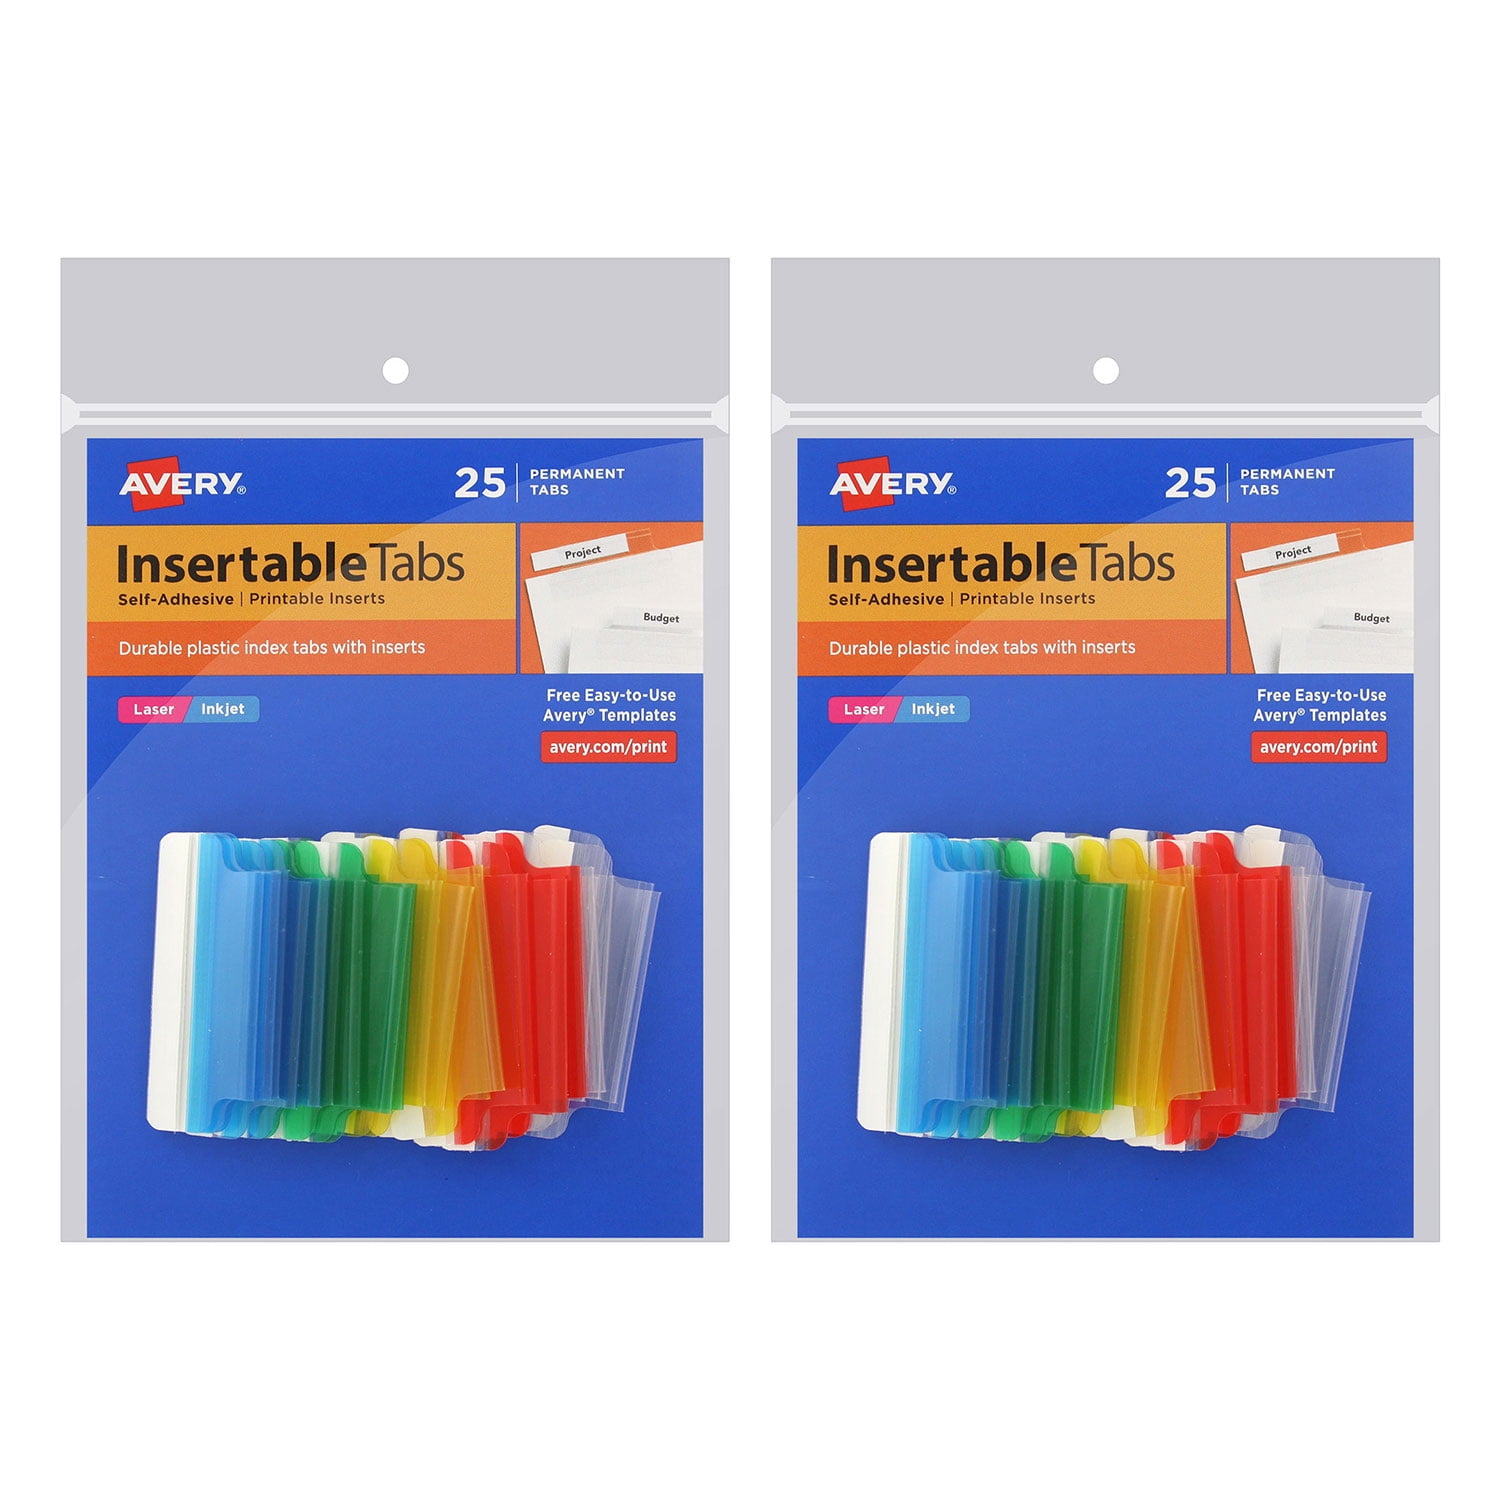 Avery Insertable Index Tabs with Printable Inserts, 1 1/2 Inch